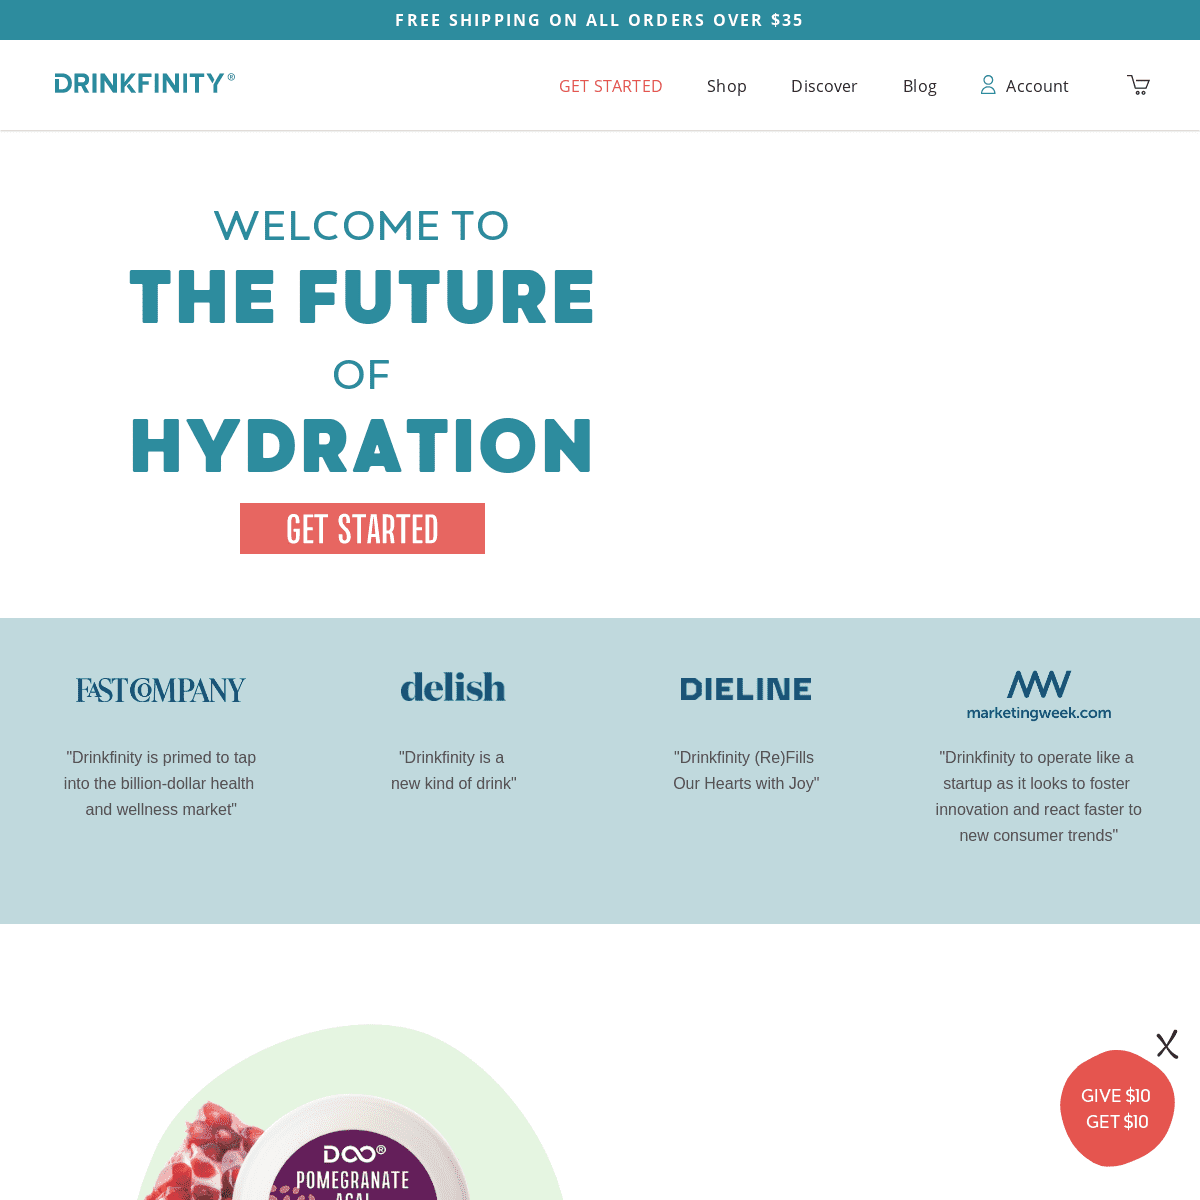 A complete backup of drinkfinity.com